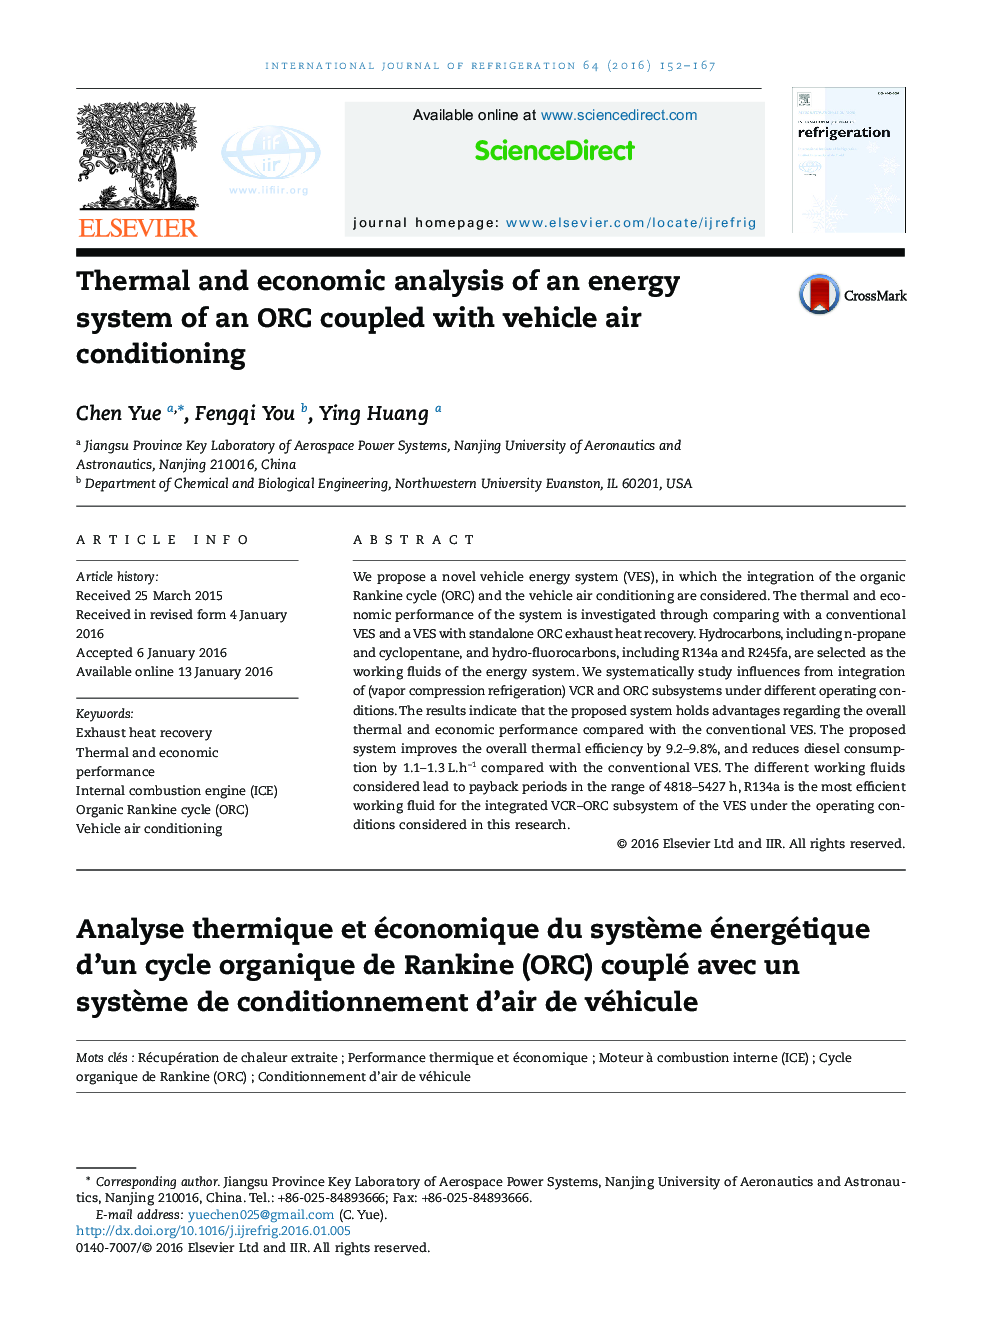 Thermal and economic analysis of an energy system of an ORC coupled with vehicle air conditioning